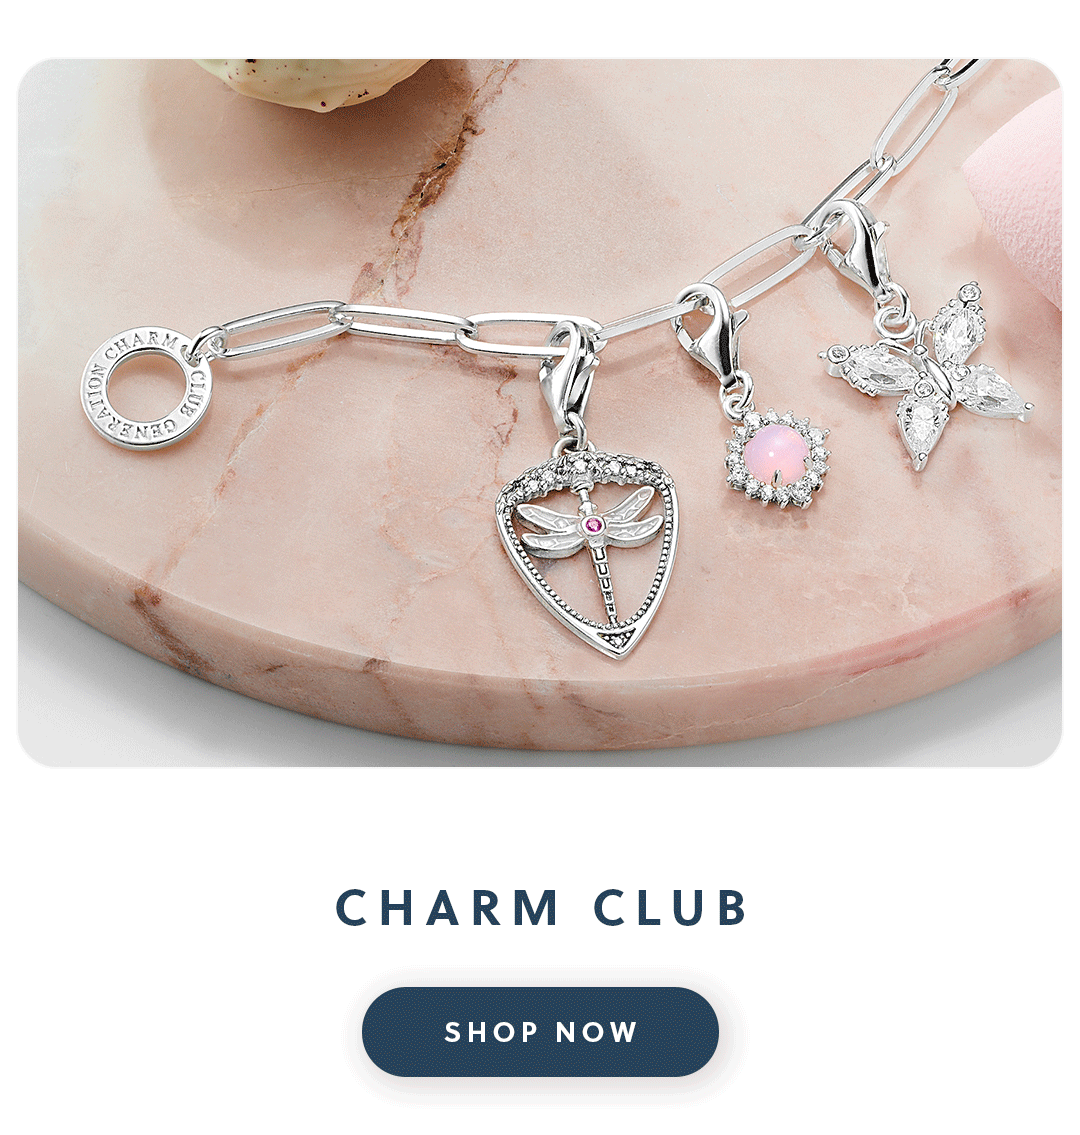 A close up of a Thomas Sabo charm bracelet with three charms with text charm club shop now